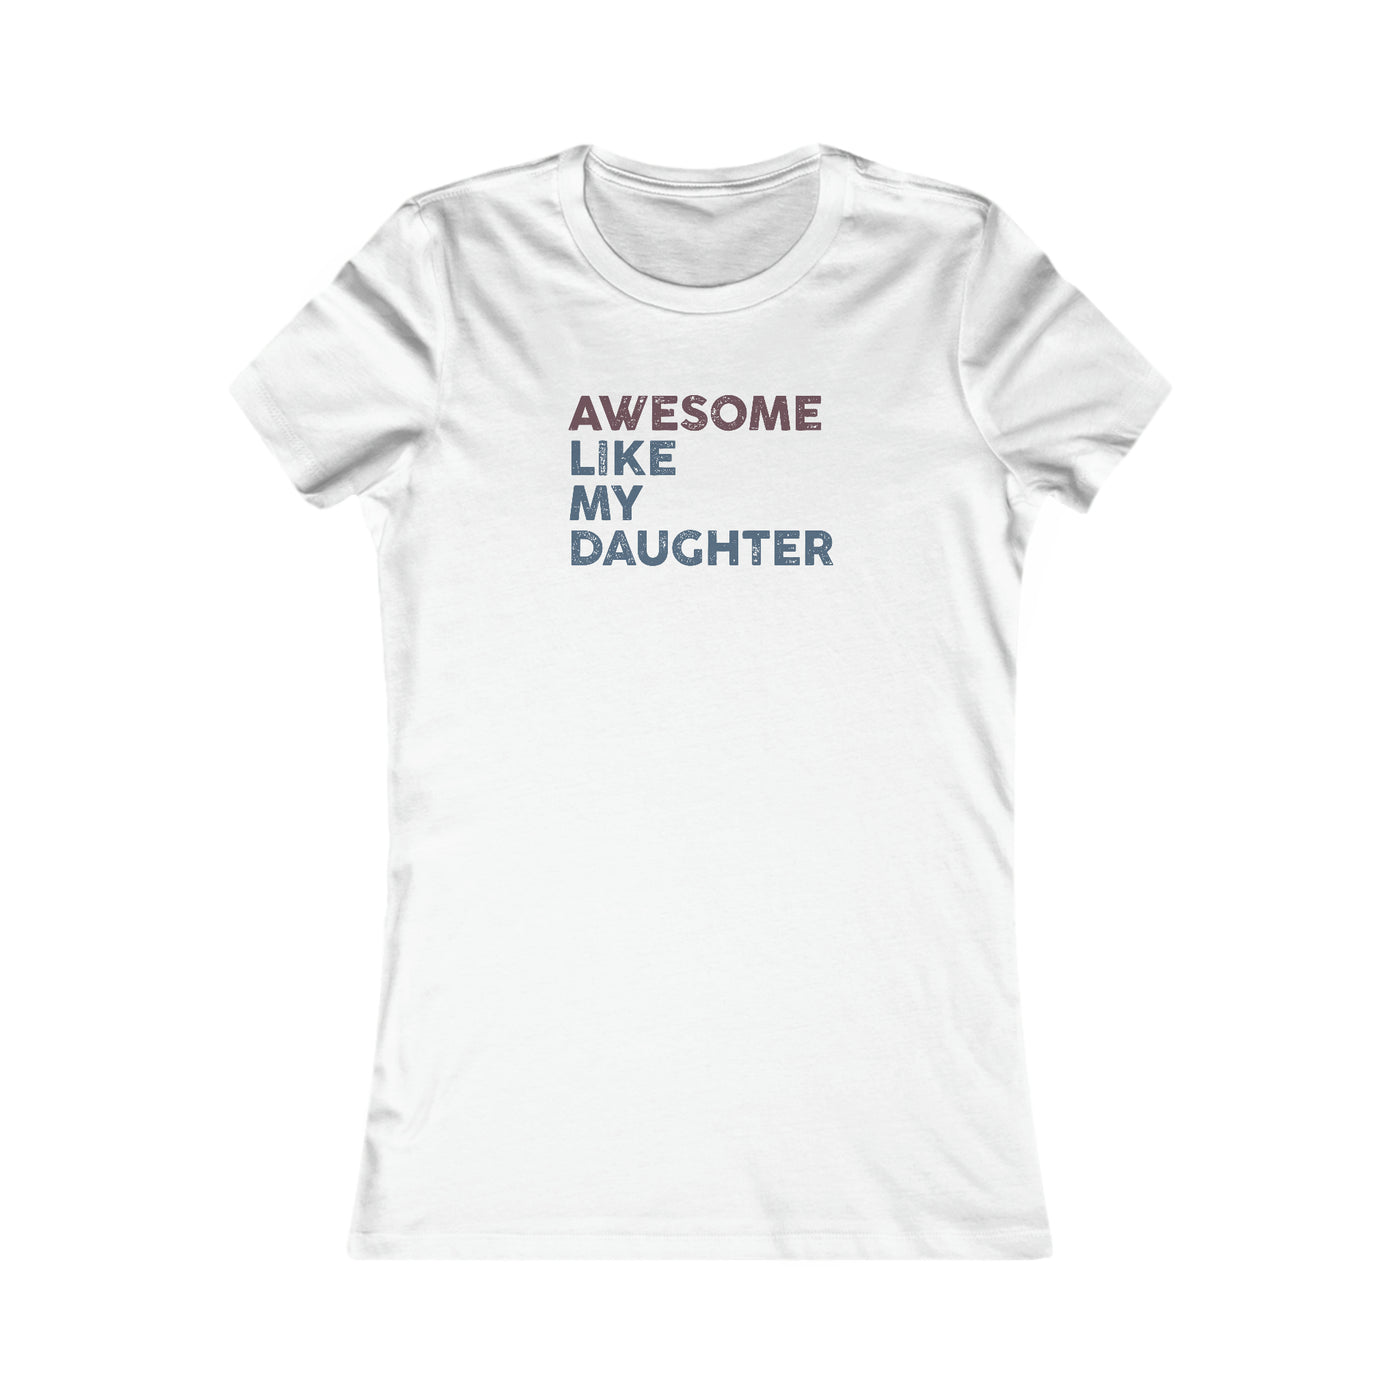 Awesome Like My Daughter Women's Favorite Tee